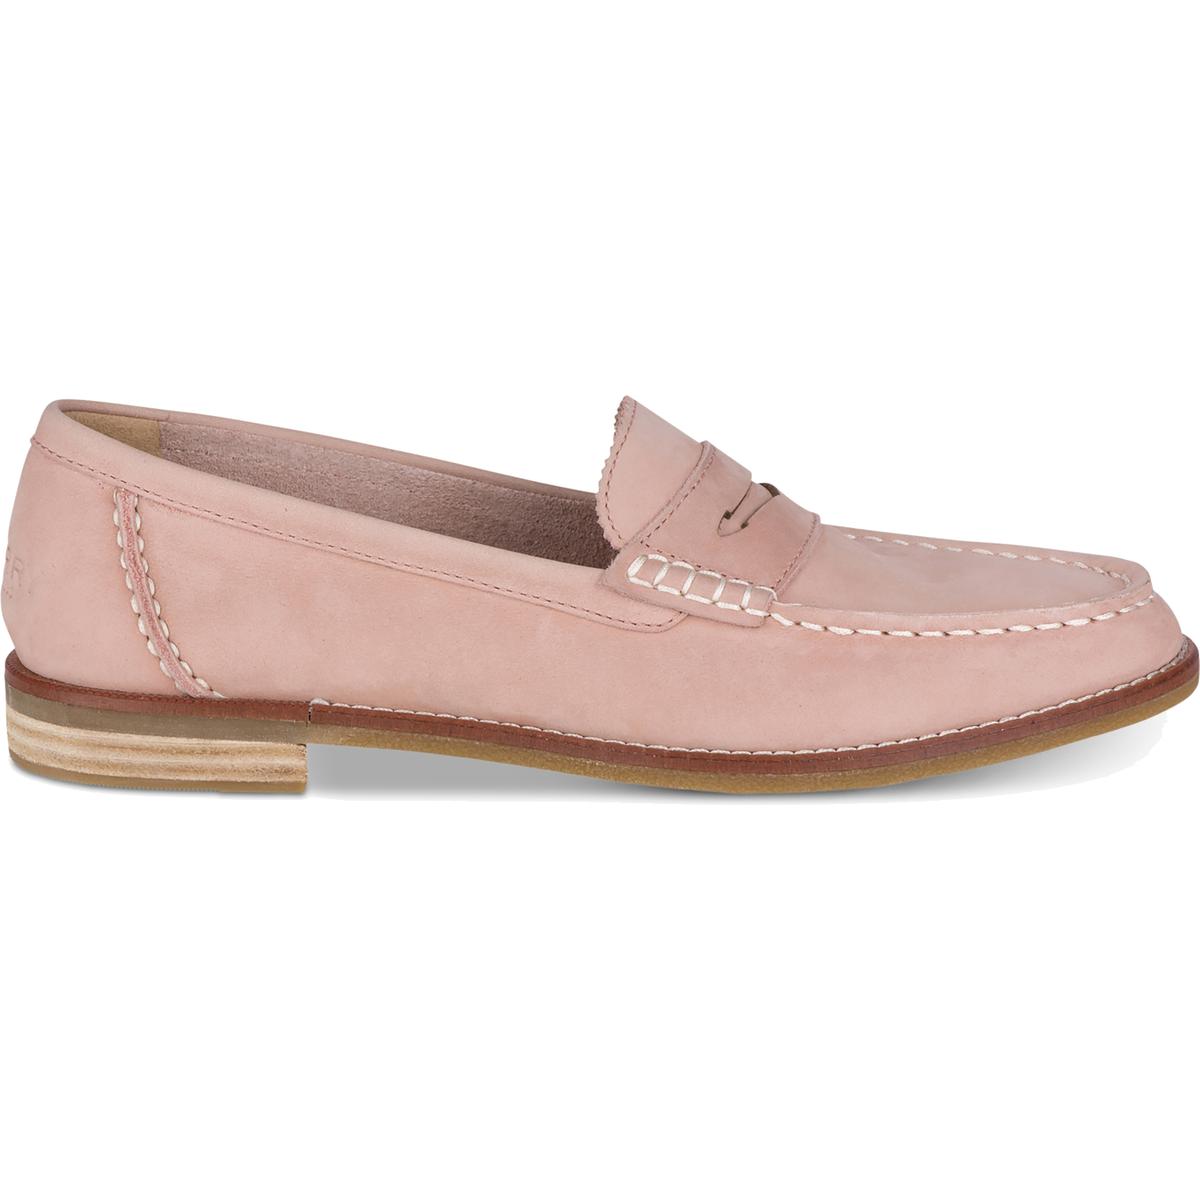 Sperry Womens Seaport Pink Suede Penny Loafers Shoes 6.5 Medium (B,M ...